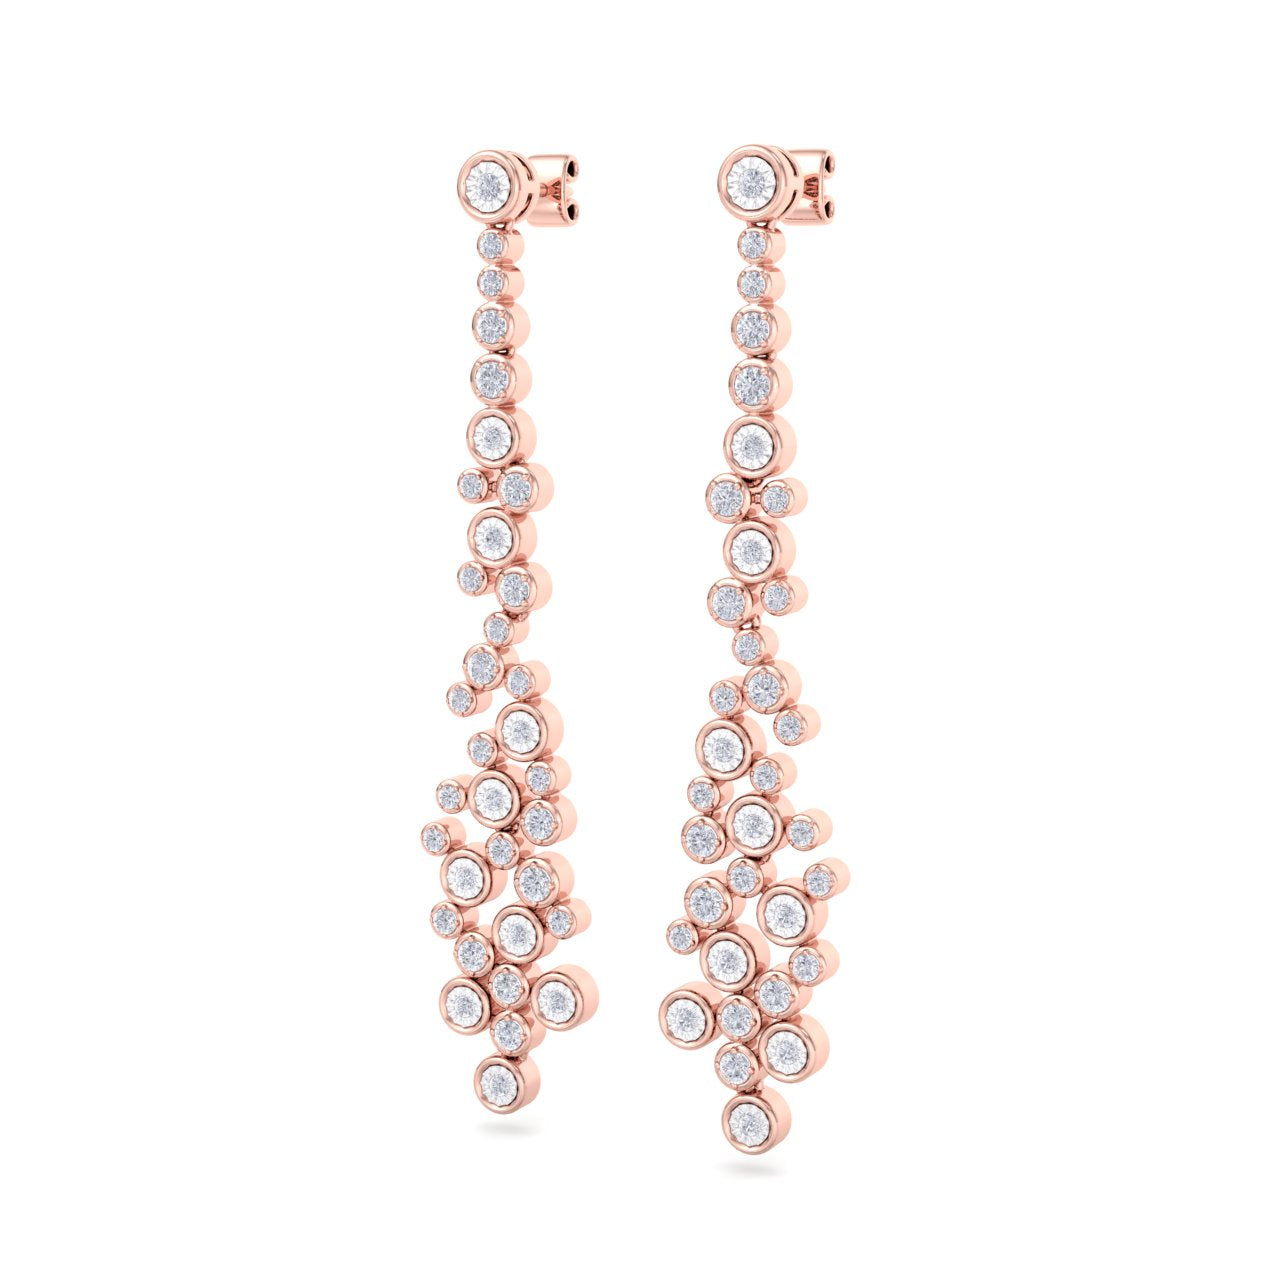 Chandelier earrings with miracle plates in white gold with white diamonds of 2.04 ct in weight